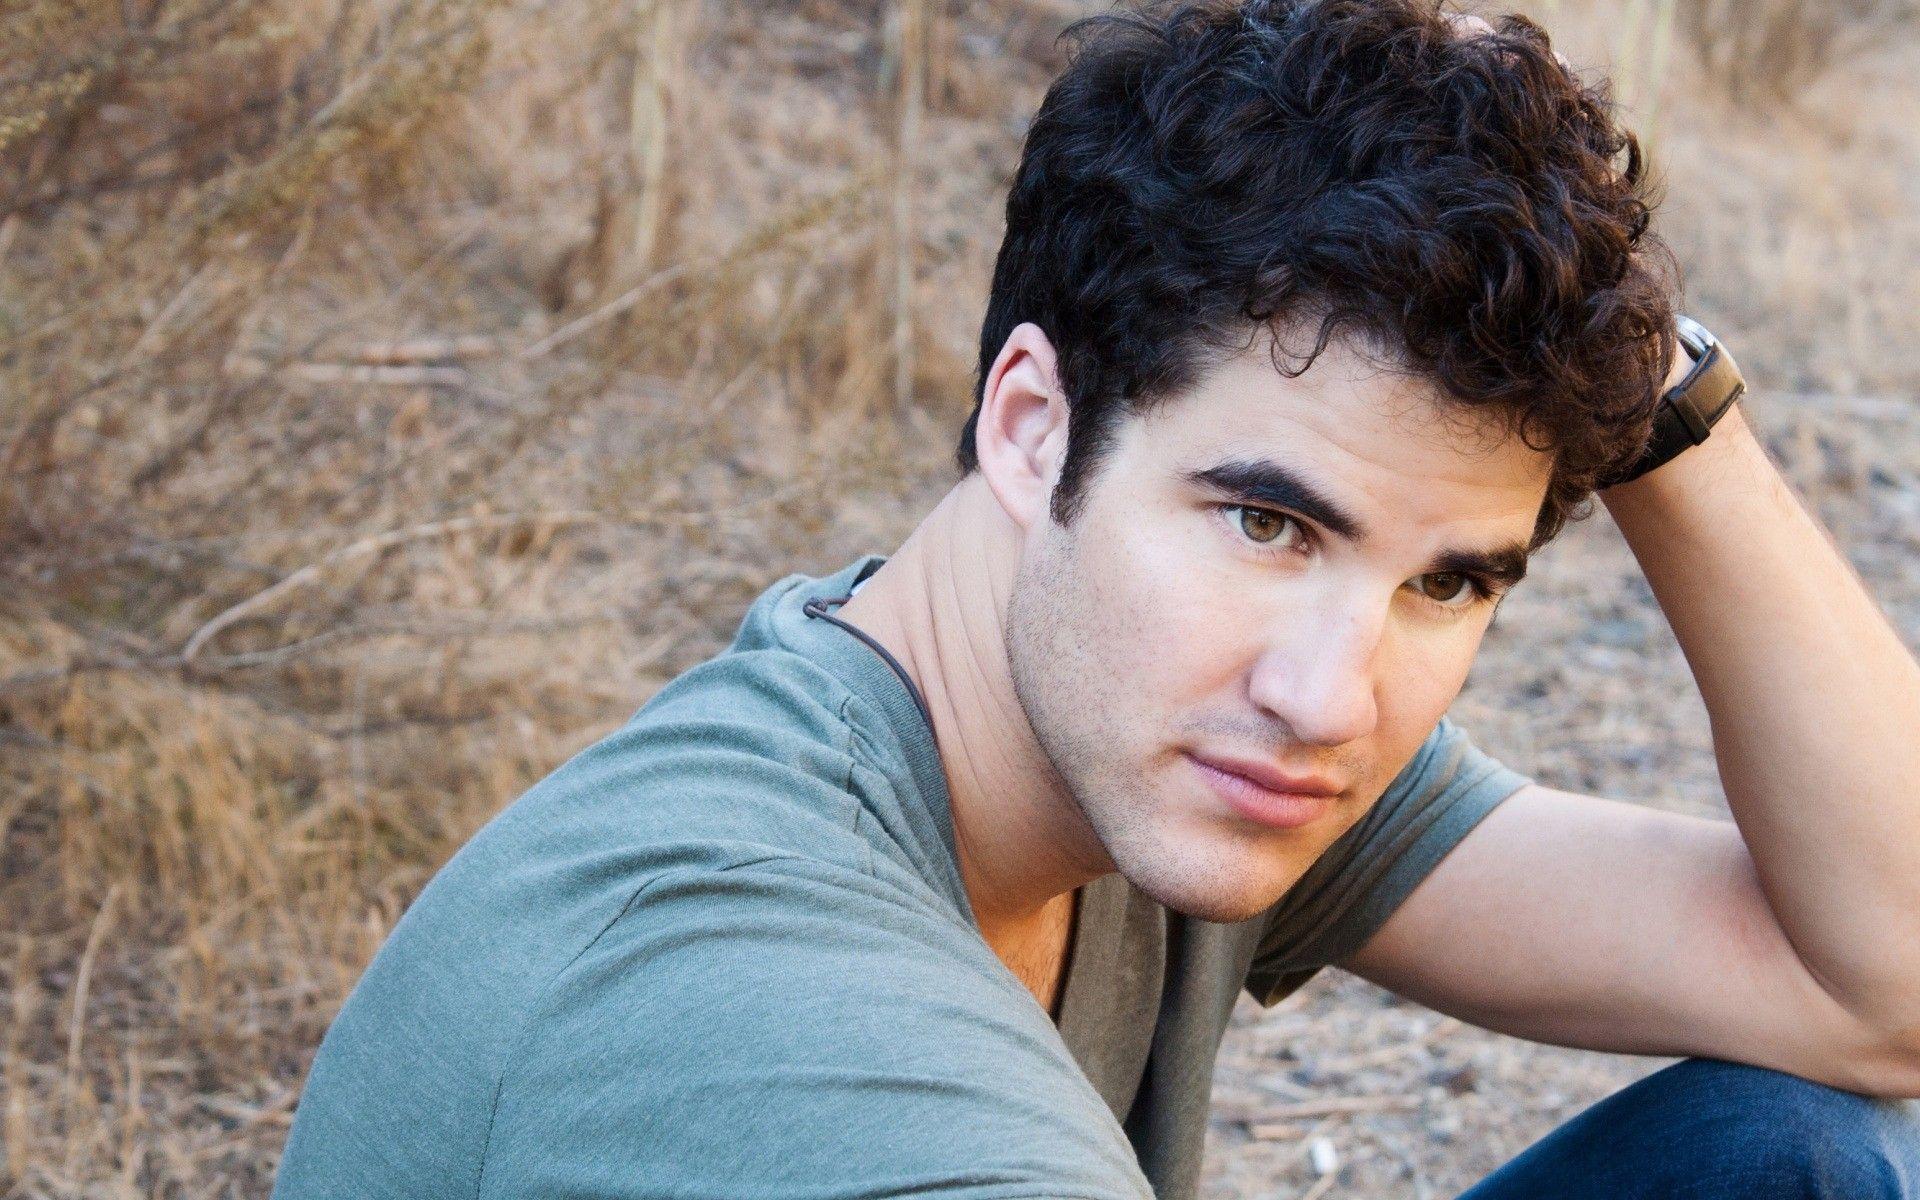 Darren Criss Thinking. Android wallpaper for free